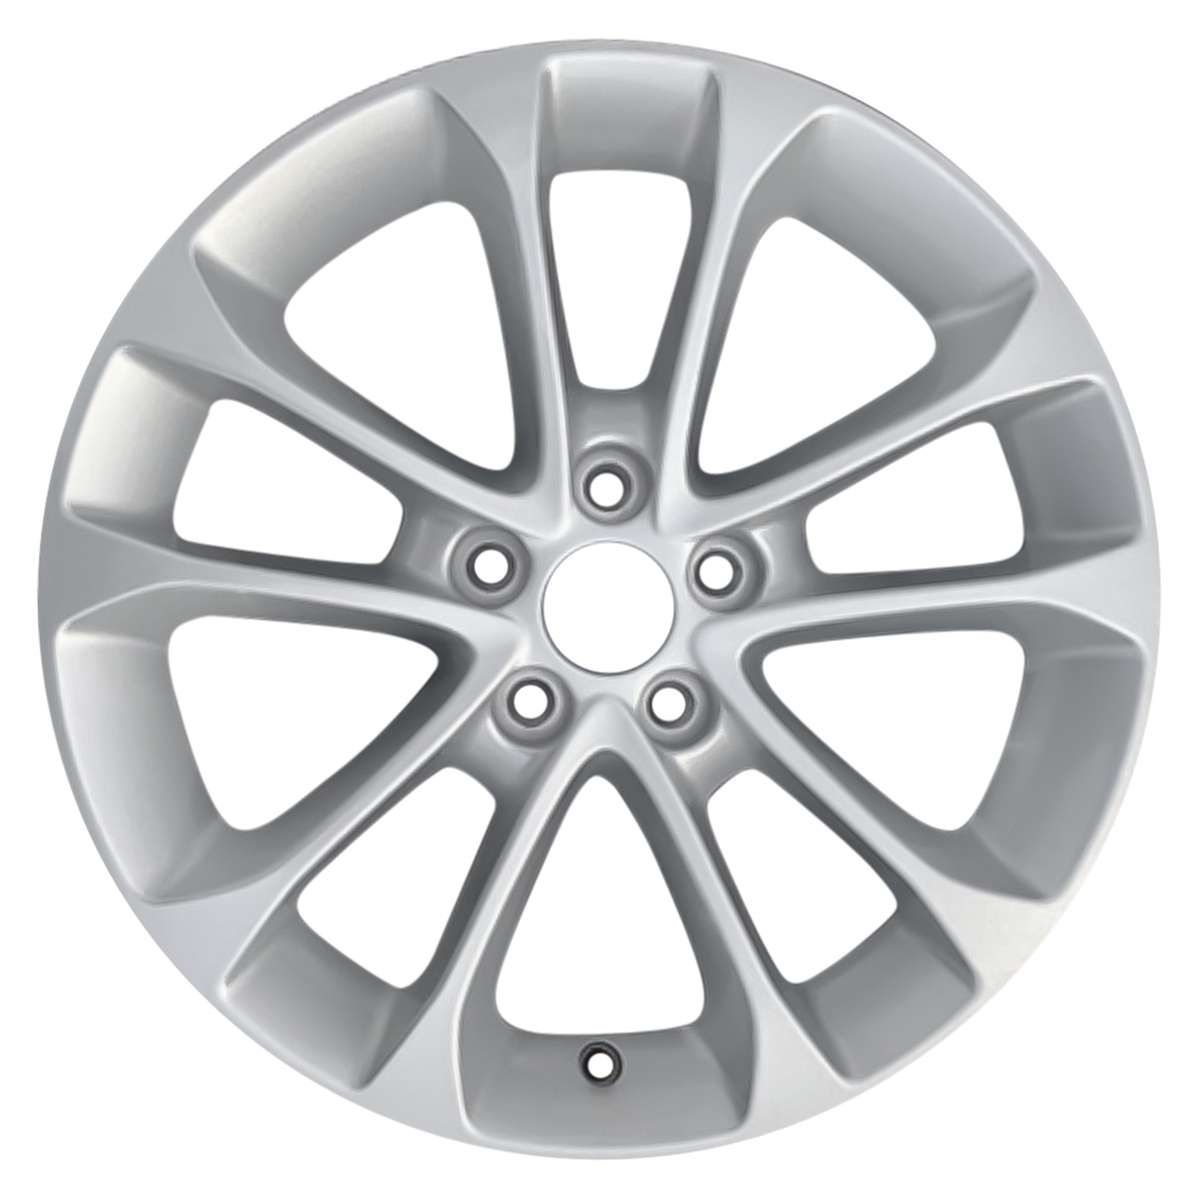 2019 Ford Fusion New 17" Replacement Wheel Rim RW10205S